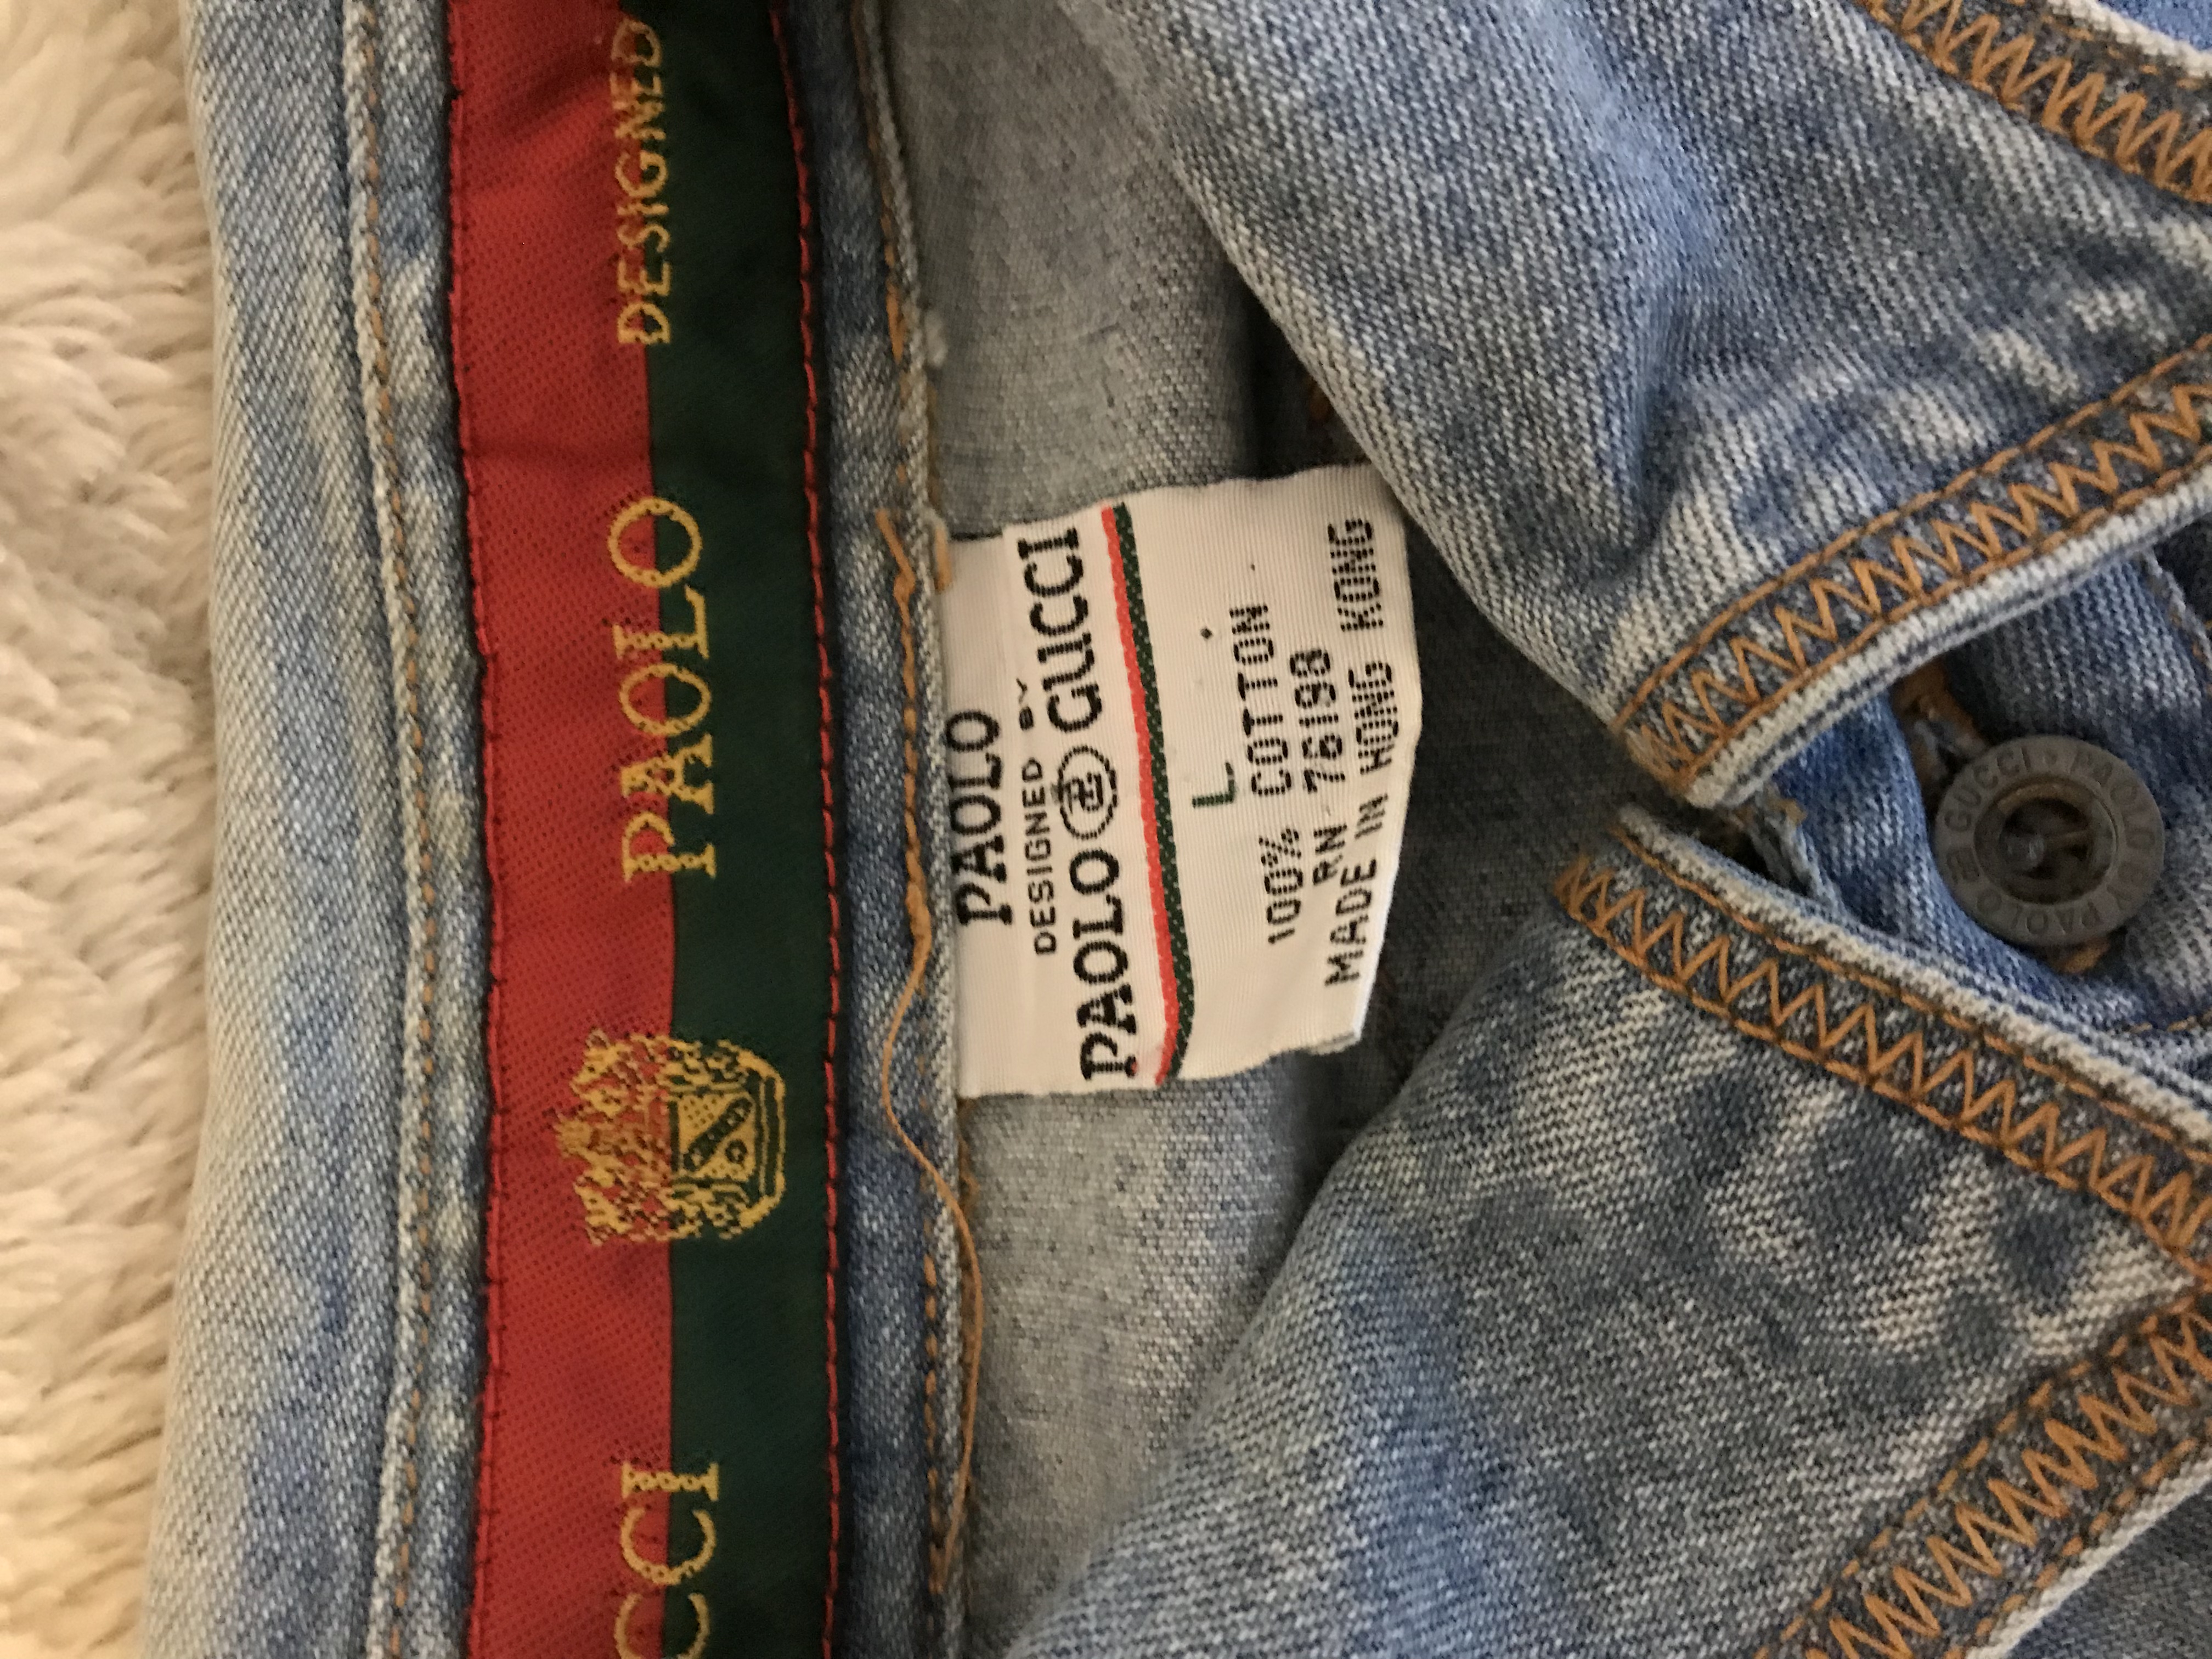 Gucci Plus was created in the 1970s by Paolo Gucci - Depop